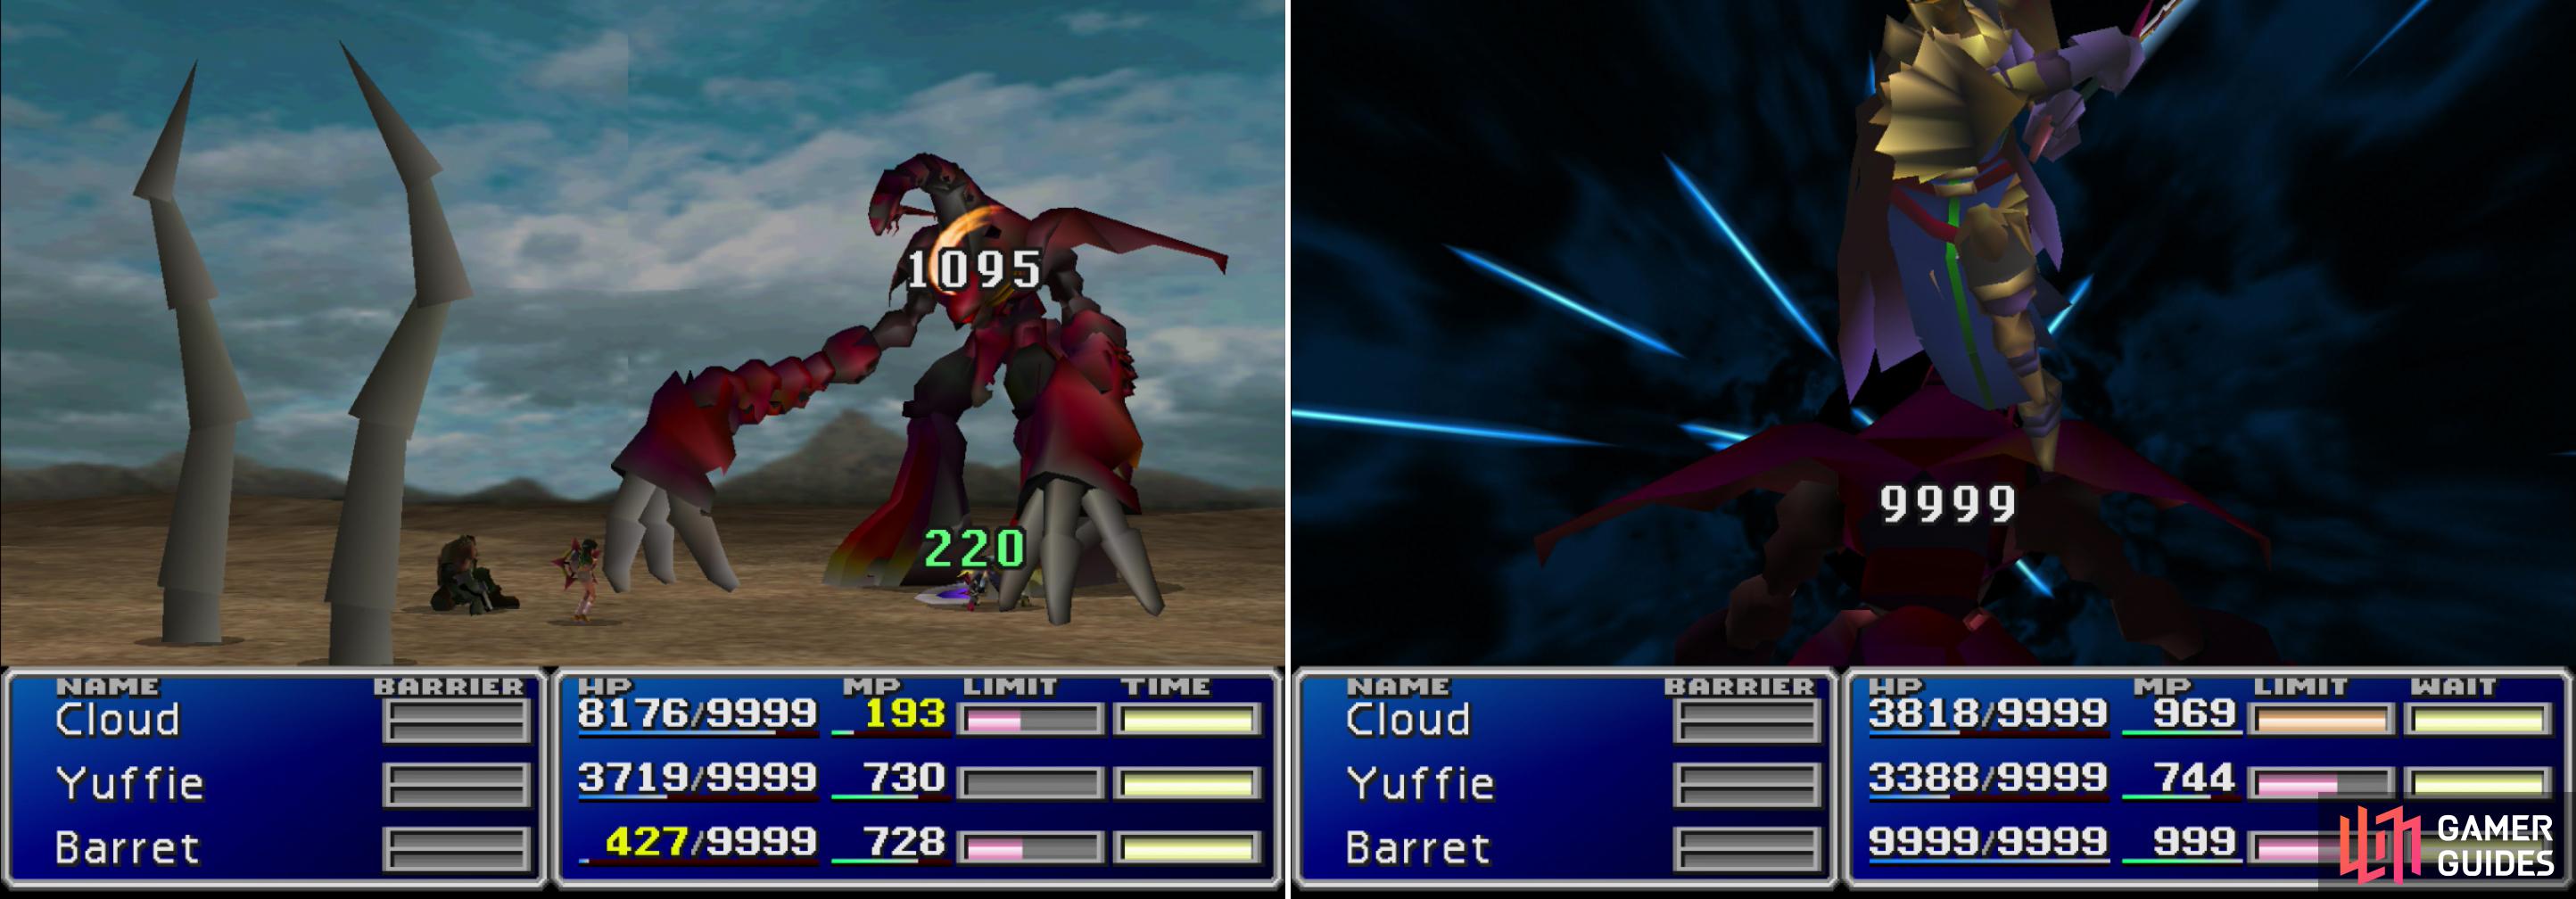 Ruby Weapon is highly resistant to physical attacks (left) so the Command Materia Strategy wont work here. Knights of the Round - perhaps boosted with MP Turbo - will deal massive damage, however (right).